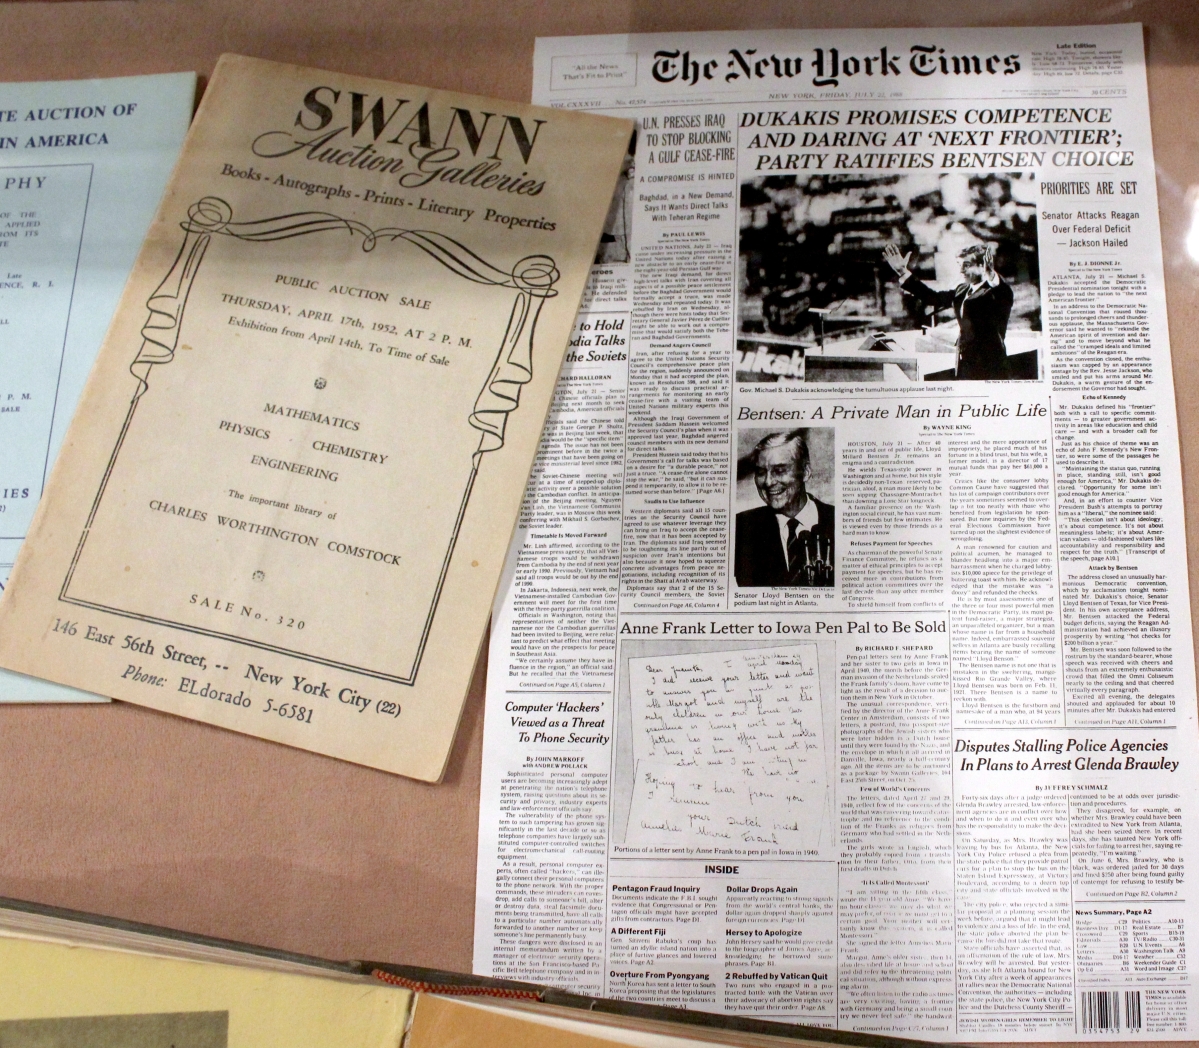 Swann made the front page of The New York Times on July 22, 1988, when it was reported that it would offer two letters from Anne Frank to an Iowan pen pal in an October 25, 1988, auction. The letters fetched $165,000.